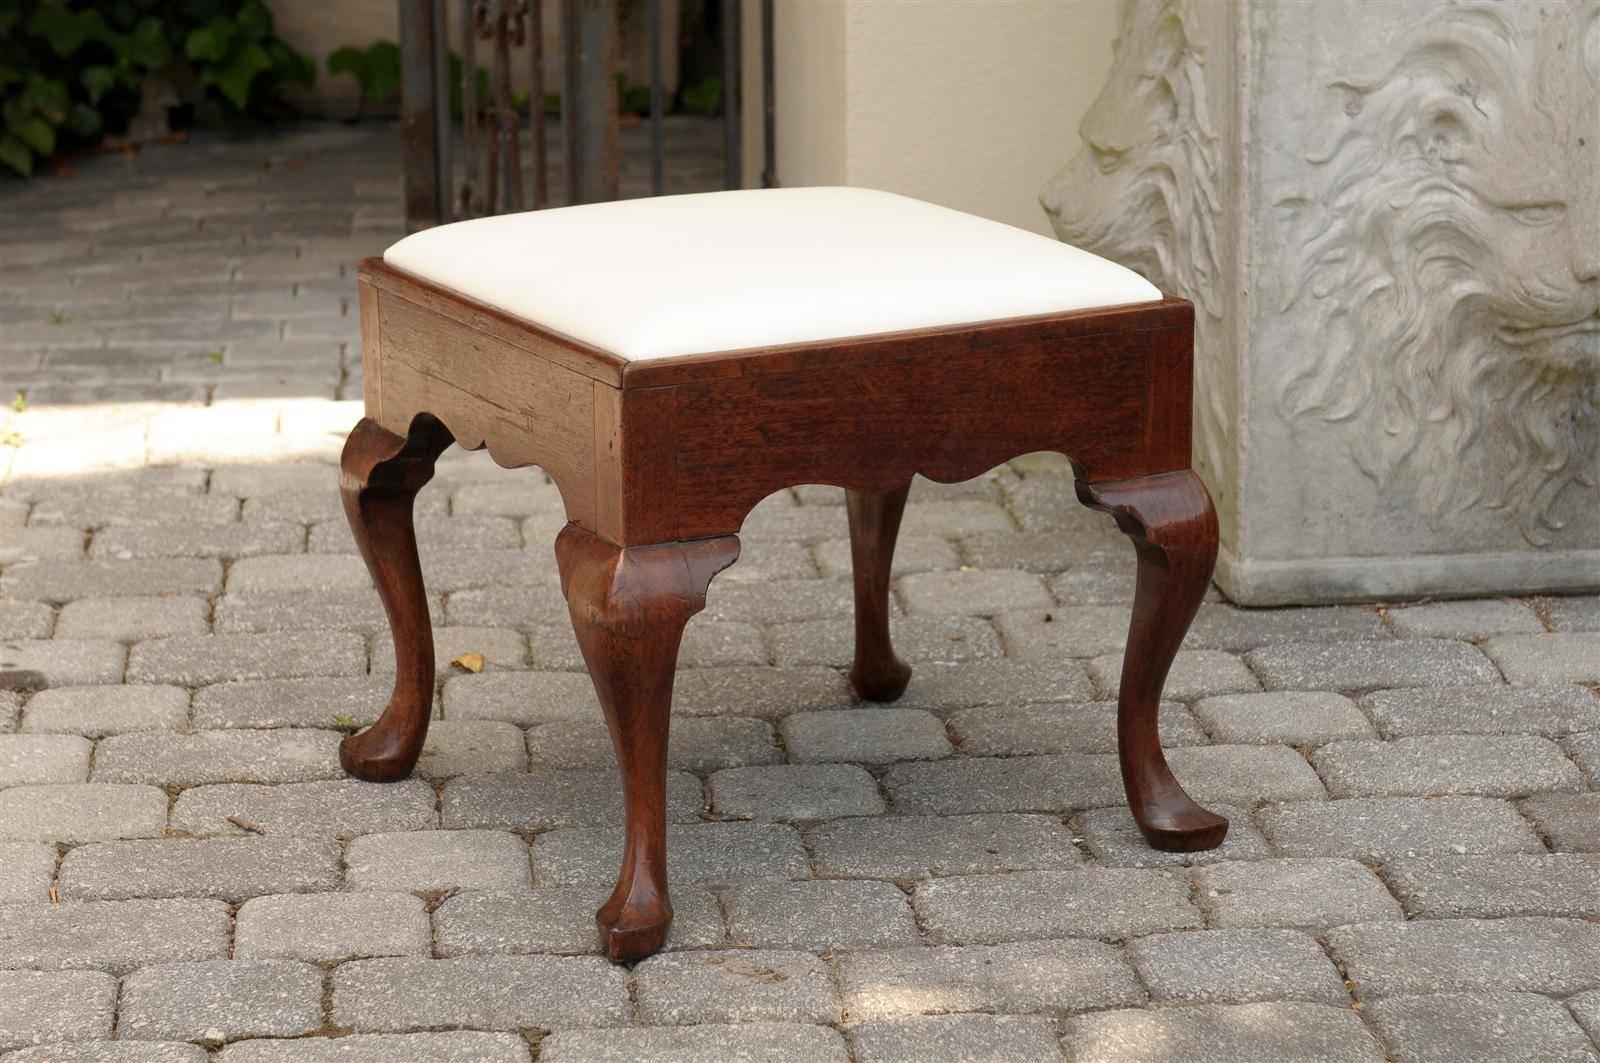 An English stool or ottoman with muslin covered seat from the 1860s.  This elegant English ottoman or stool features a wood square structure over four cabriole legs with pad feet and shaped apron. The muslin upholstery is new. In England, the period